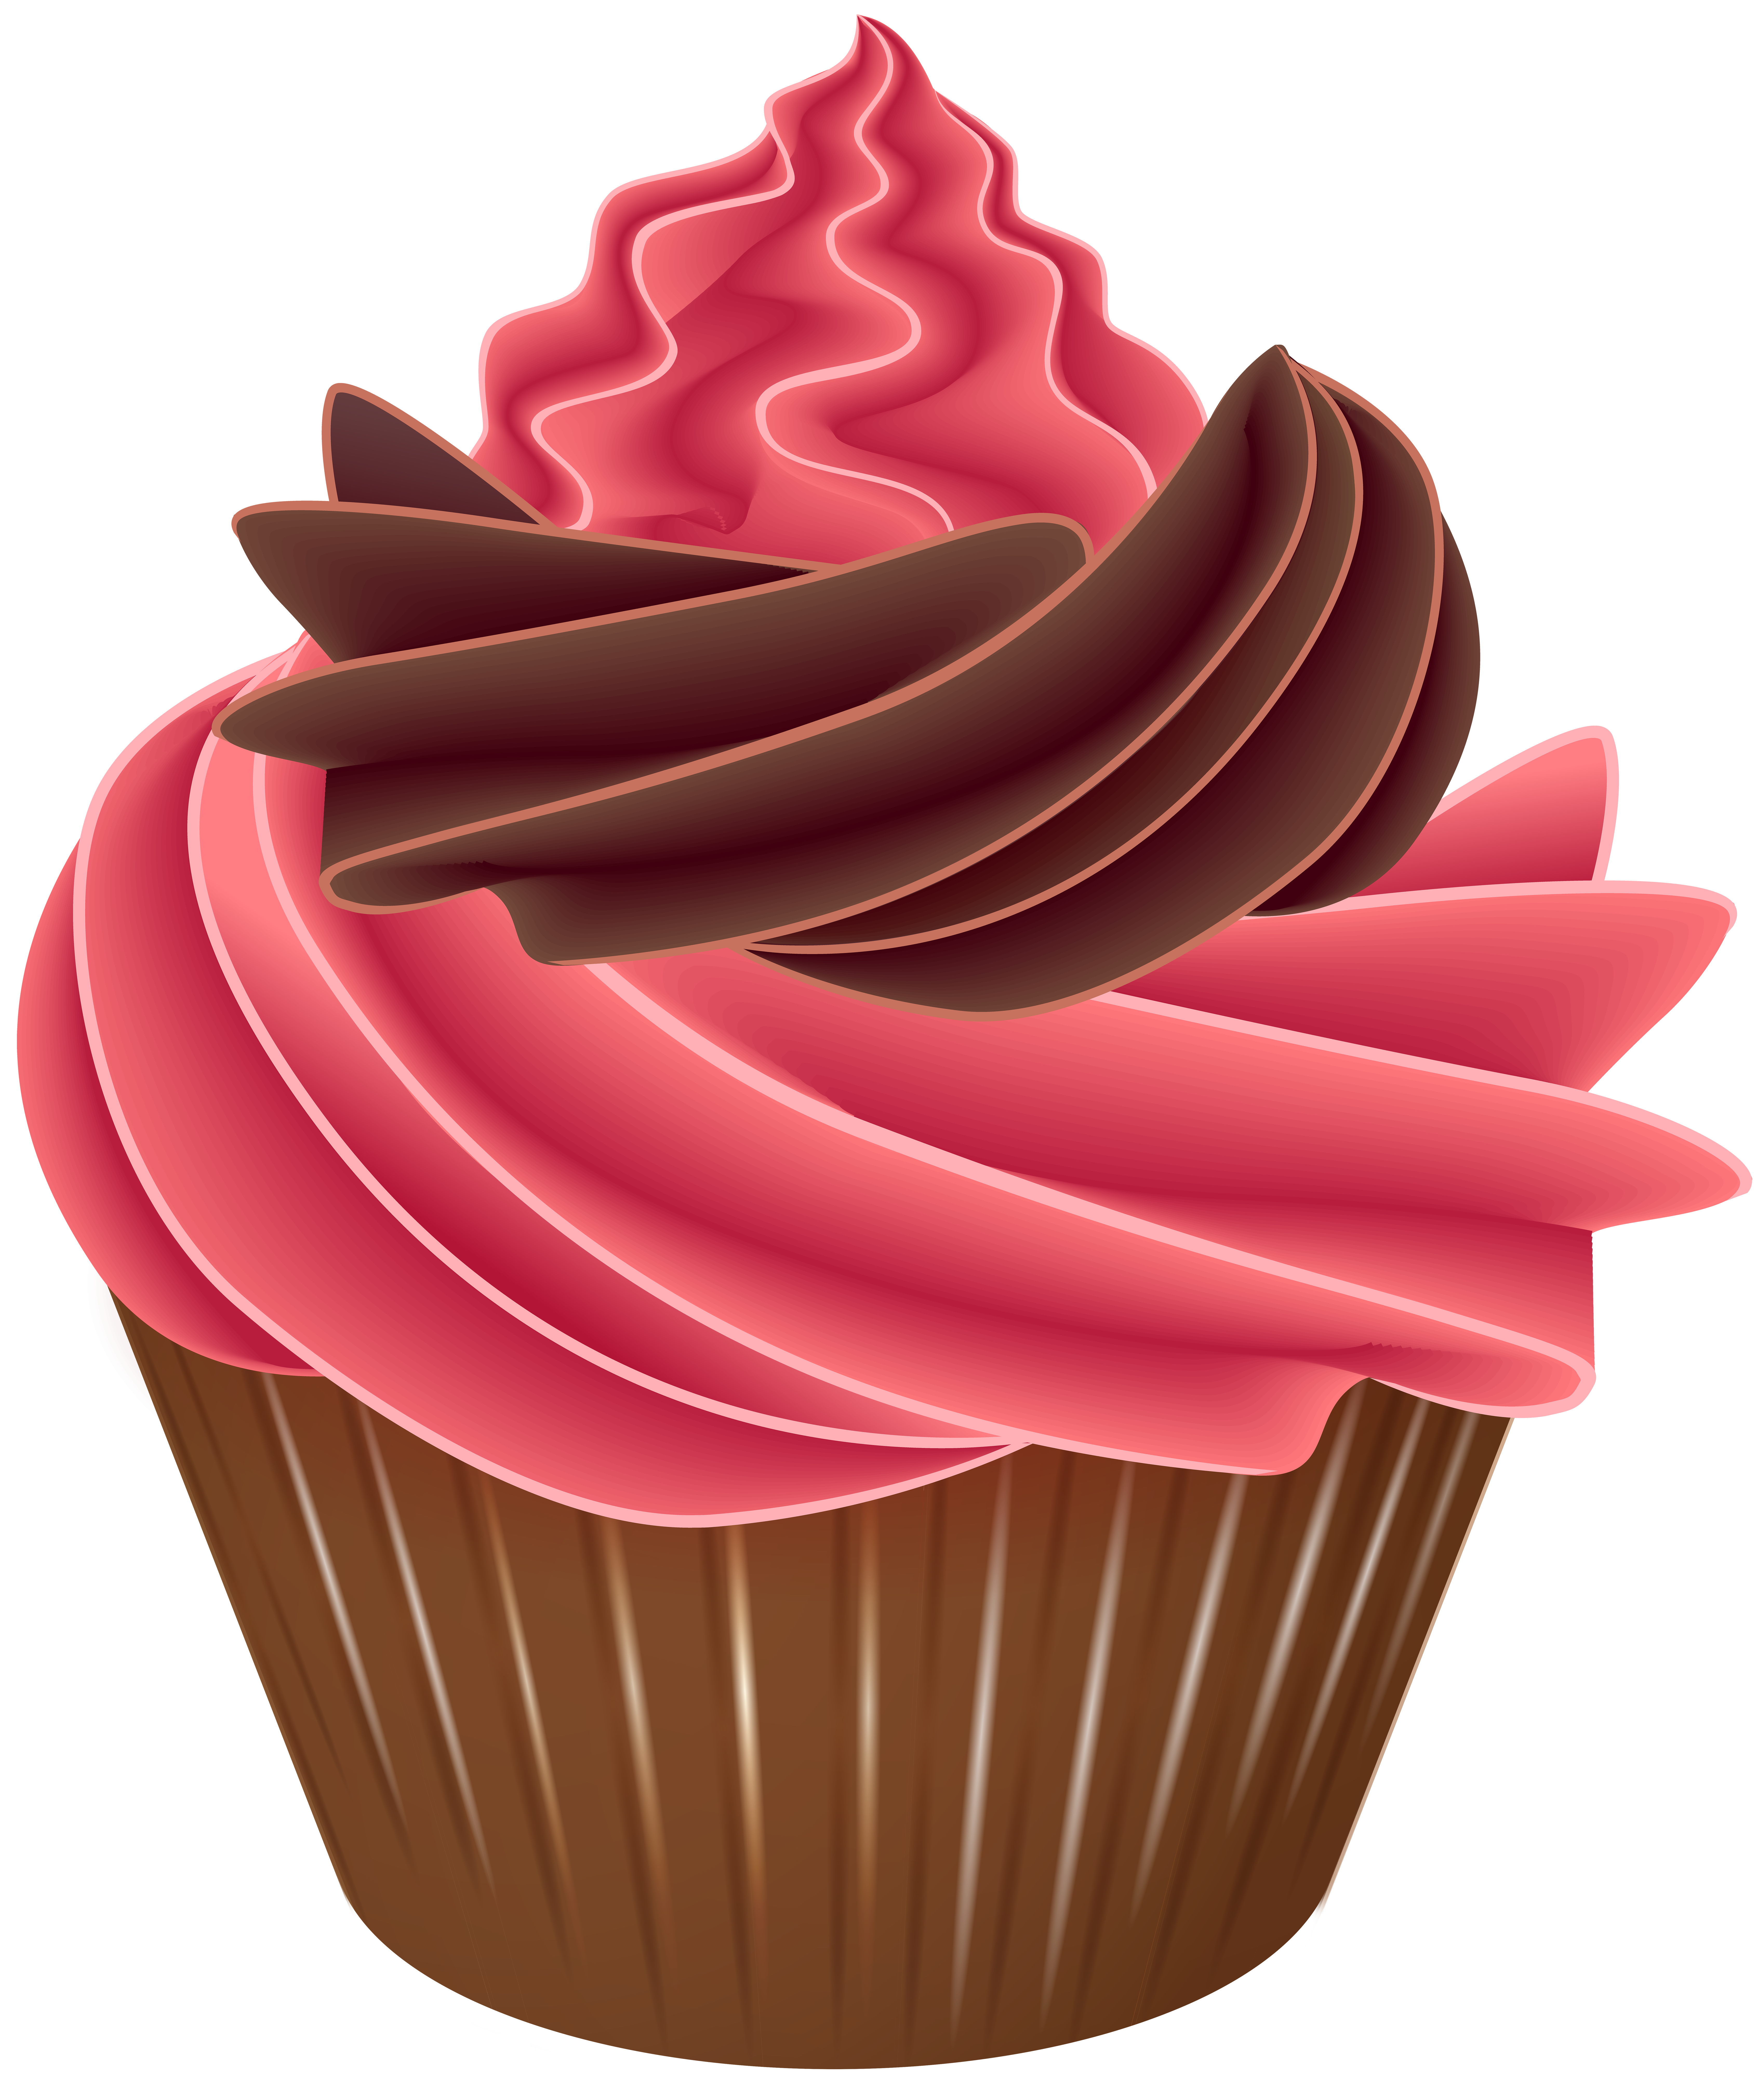 Clipart Cupcake Donut Clipart Cupcake Donut Transparent Free For